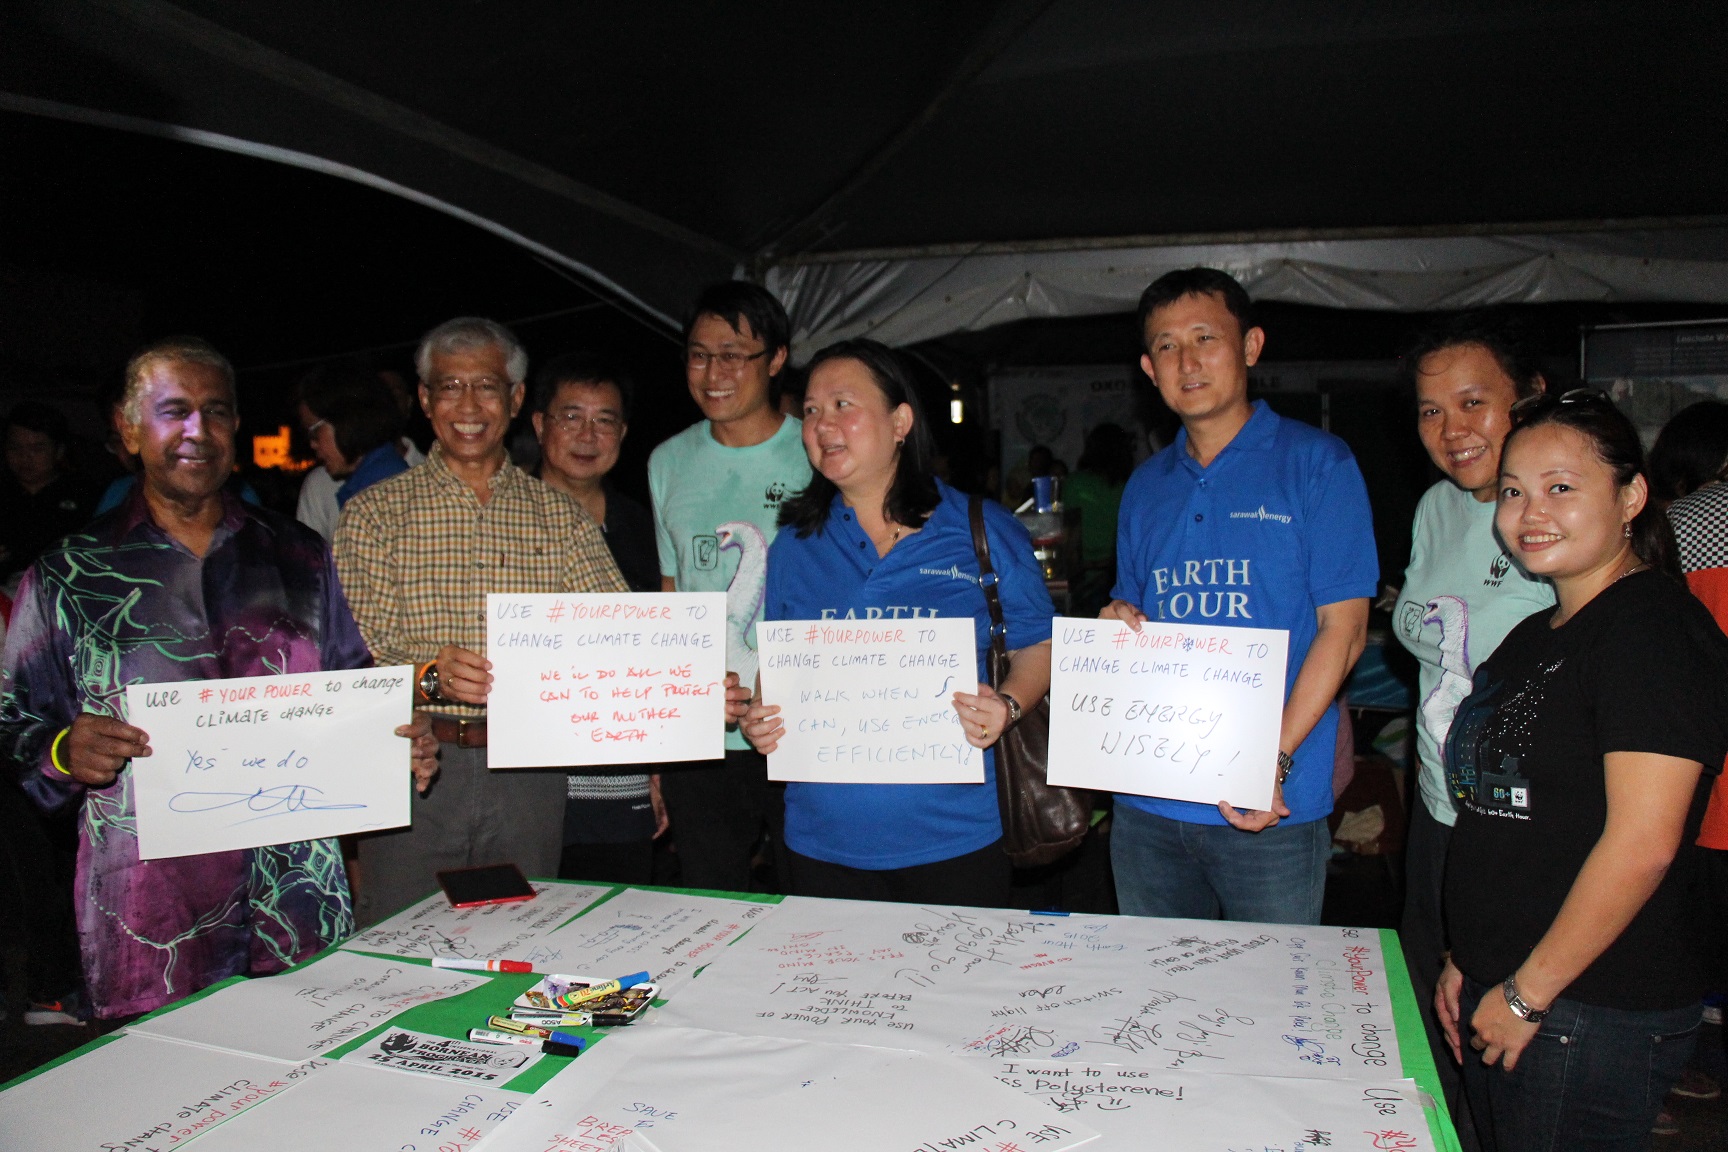 VIPs sharing their individual pledges during the Earth Hour event. From left are Assistant Minister in the Chief Minister’s Department Datuk Daud Abdul Rahman, DBKU Mayor Datuk Abang Abdul Wahap Abang Julai, Sarawak Energy assistant general manager of corporate communications Peing Tajang and general manager of research and development Dr. Chen Shiun. © WWF-Malaysia/Zora Chan